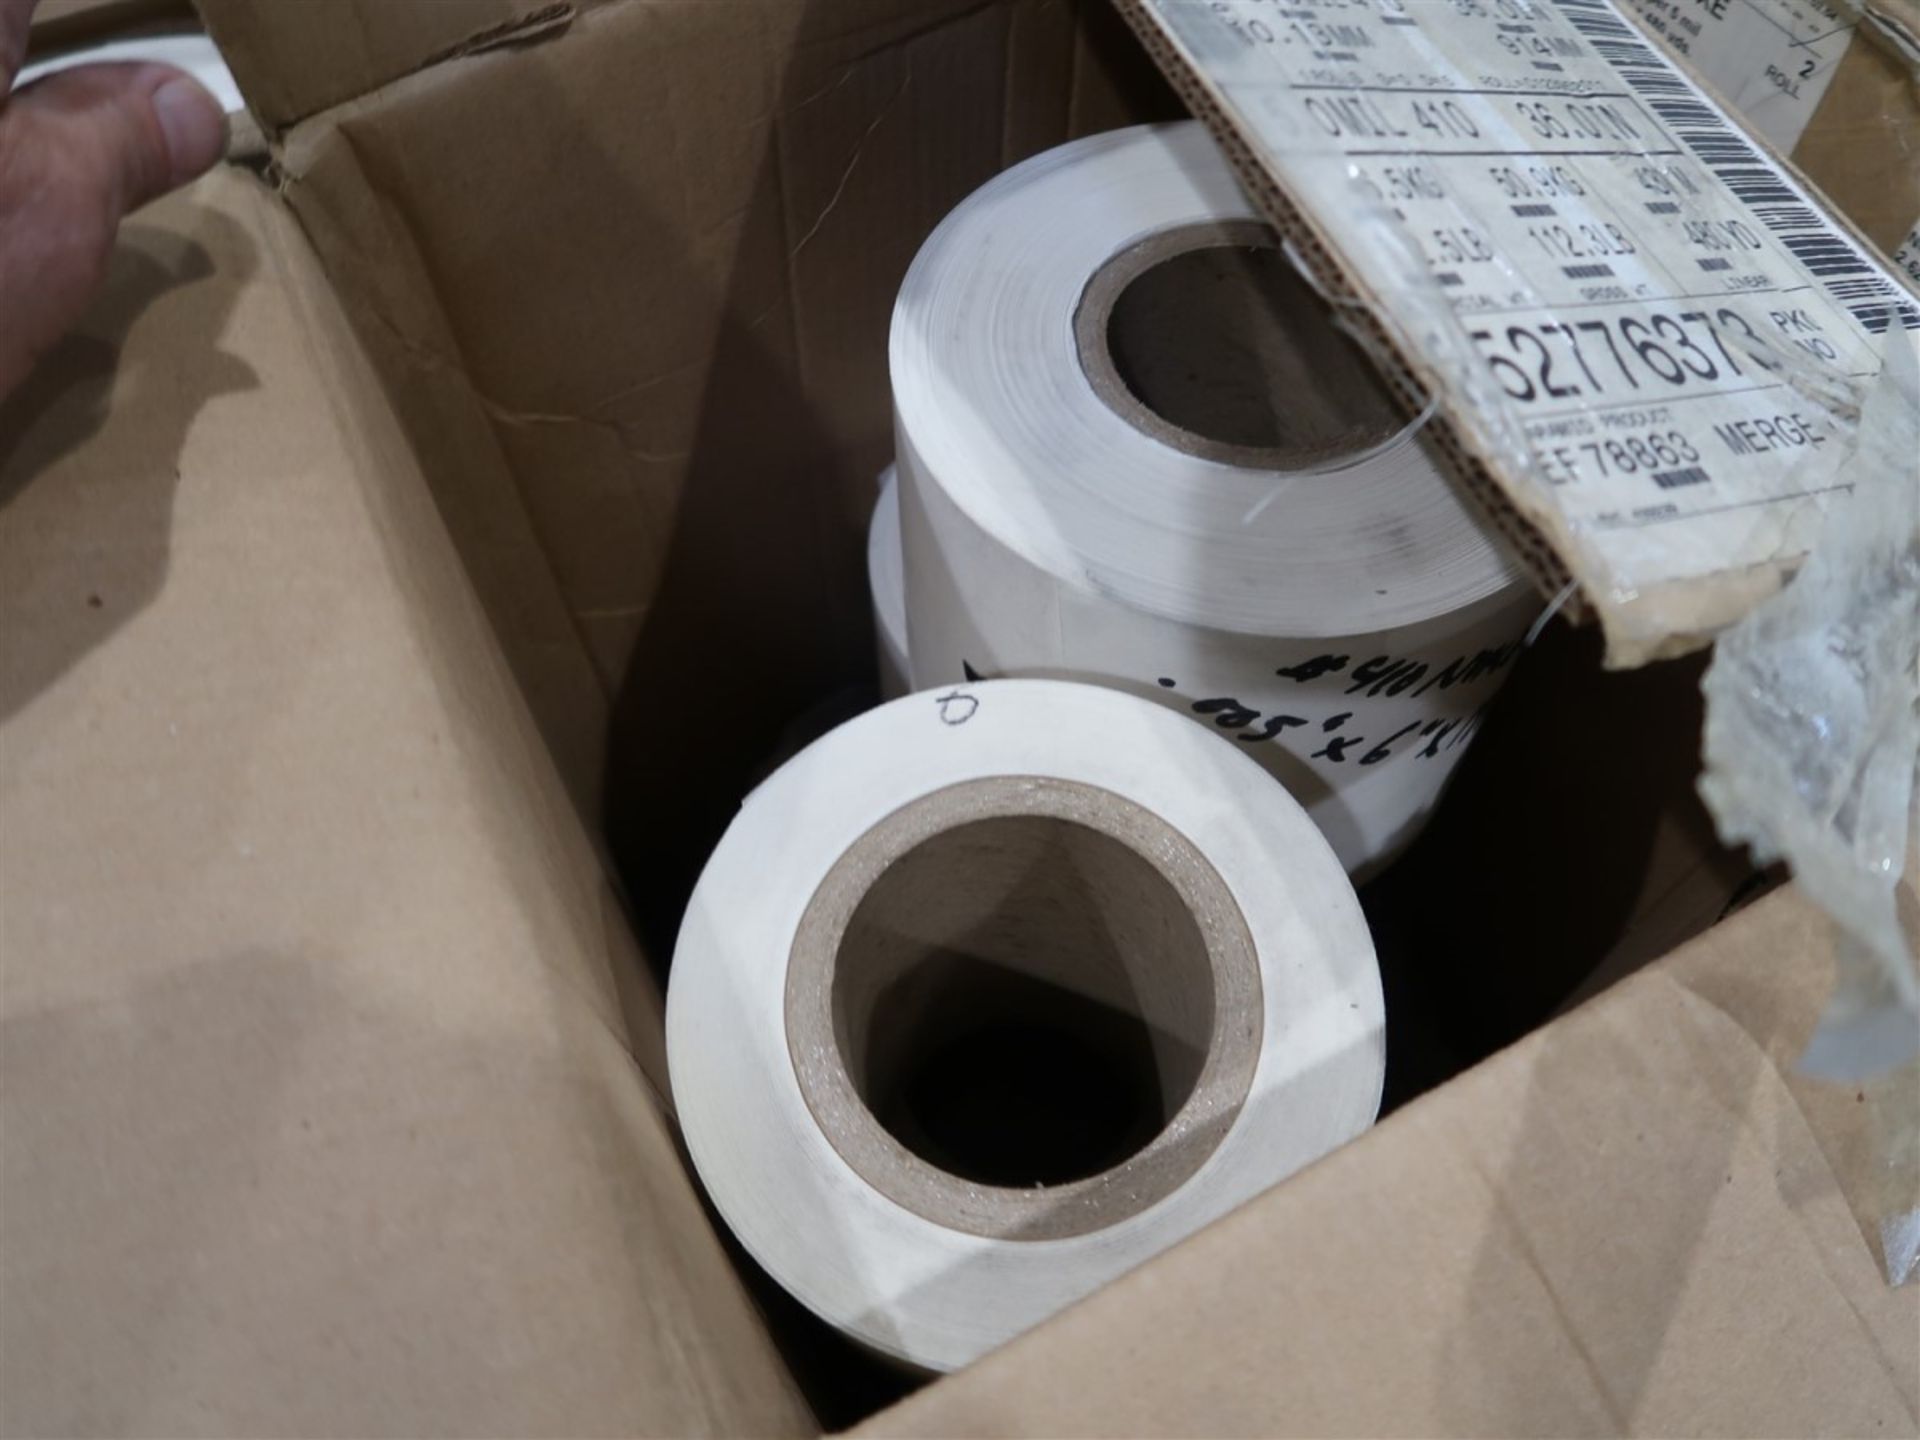 4 BOXES OF PAISLEY PAPER ROLLS - Image 3 of 4